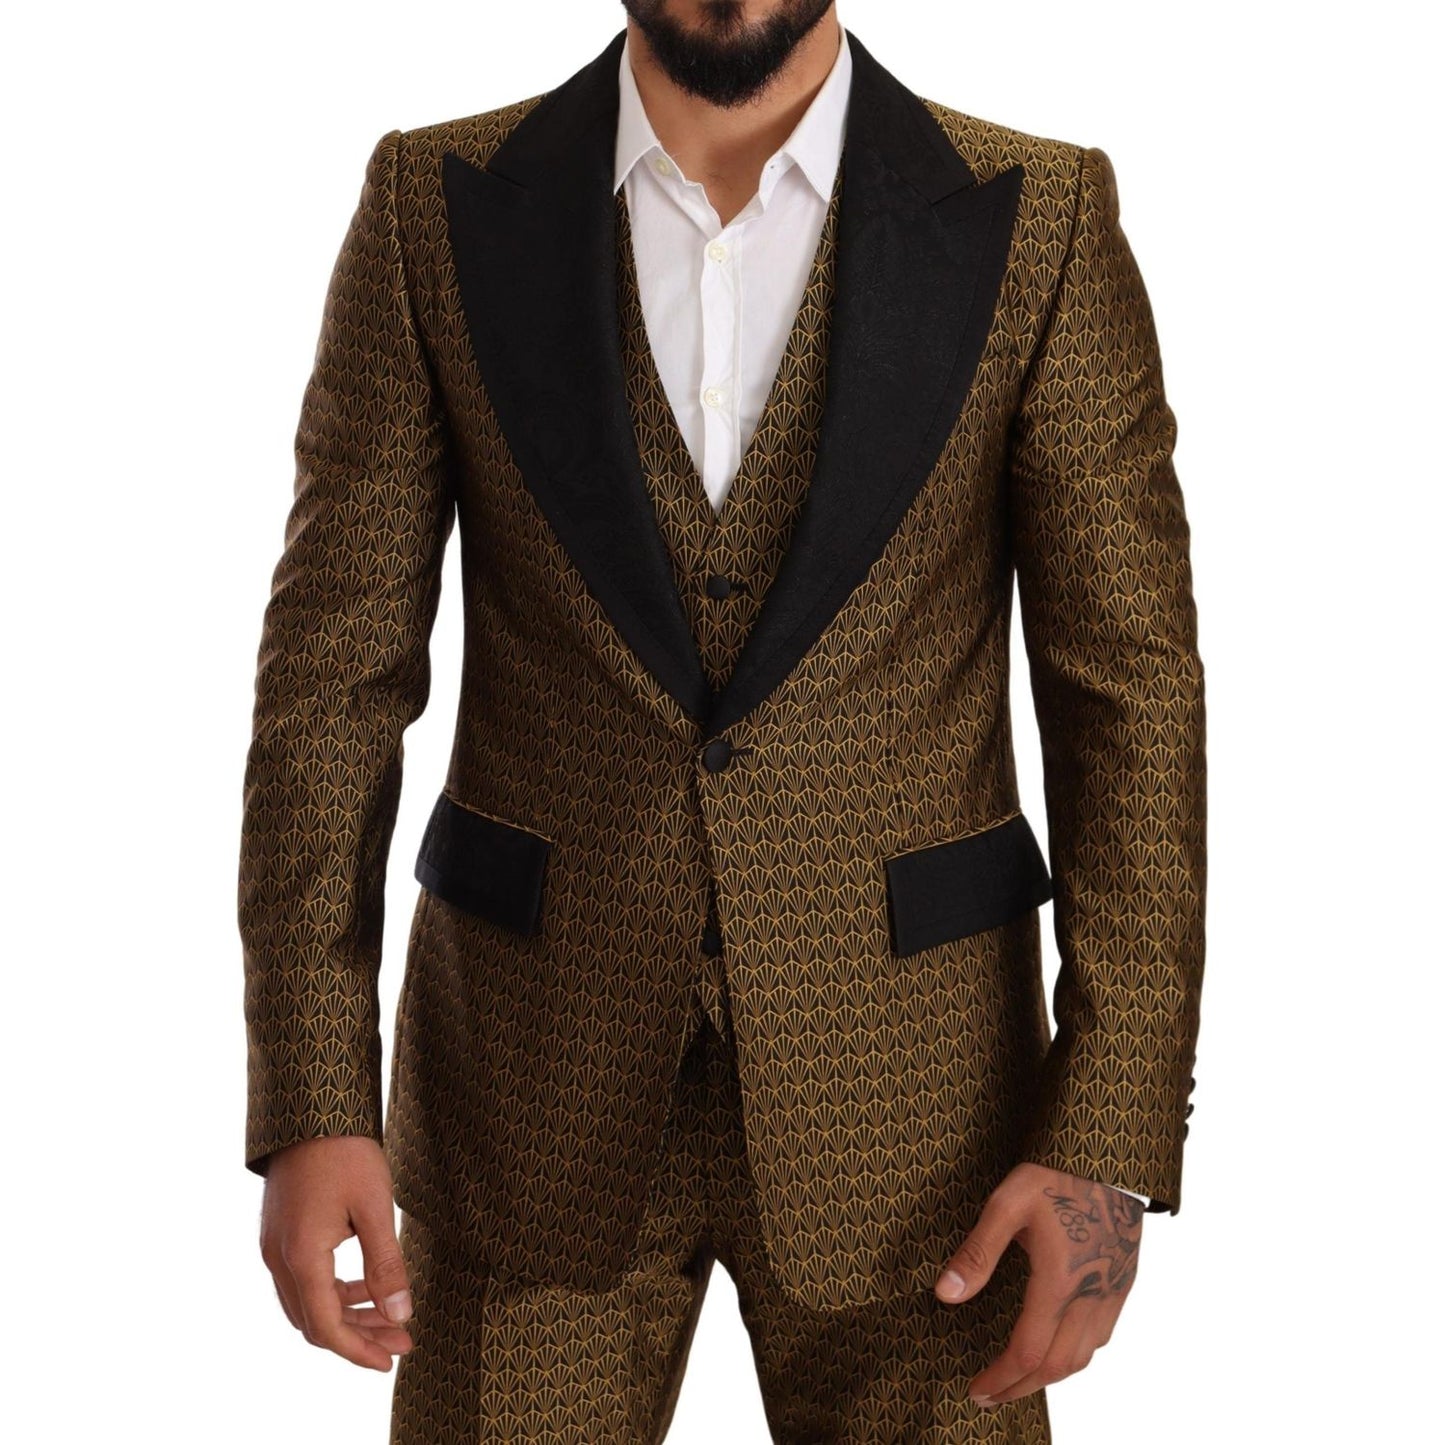 Dolce & Gabbana Elegant Yellow Patterned Three-Piece Suit black-yellow-slim-fit-3-piece-one-button-suit IMG_6563-scaled-bc7d62b2-366.jpg